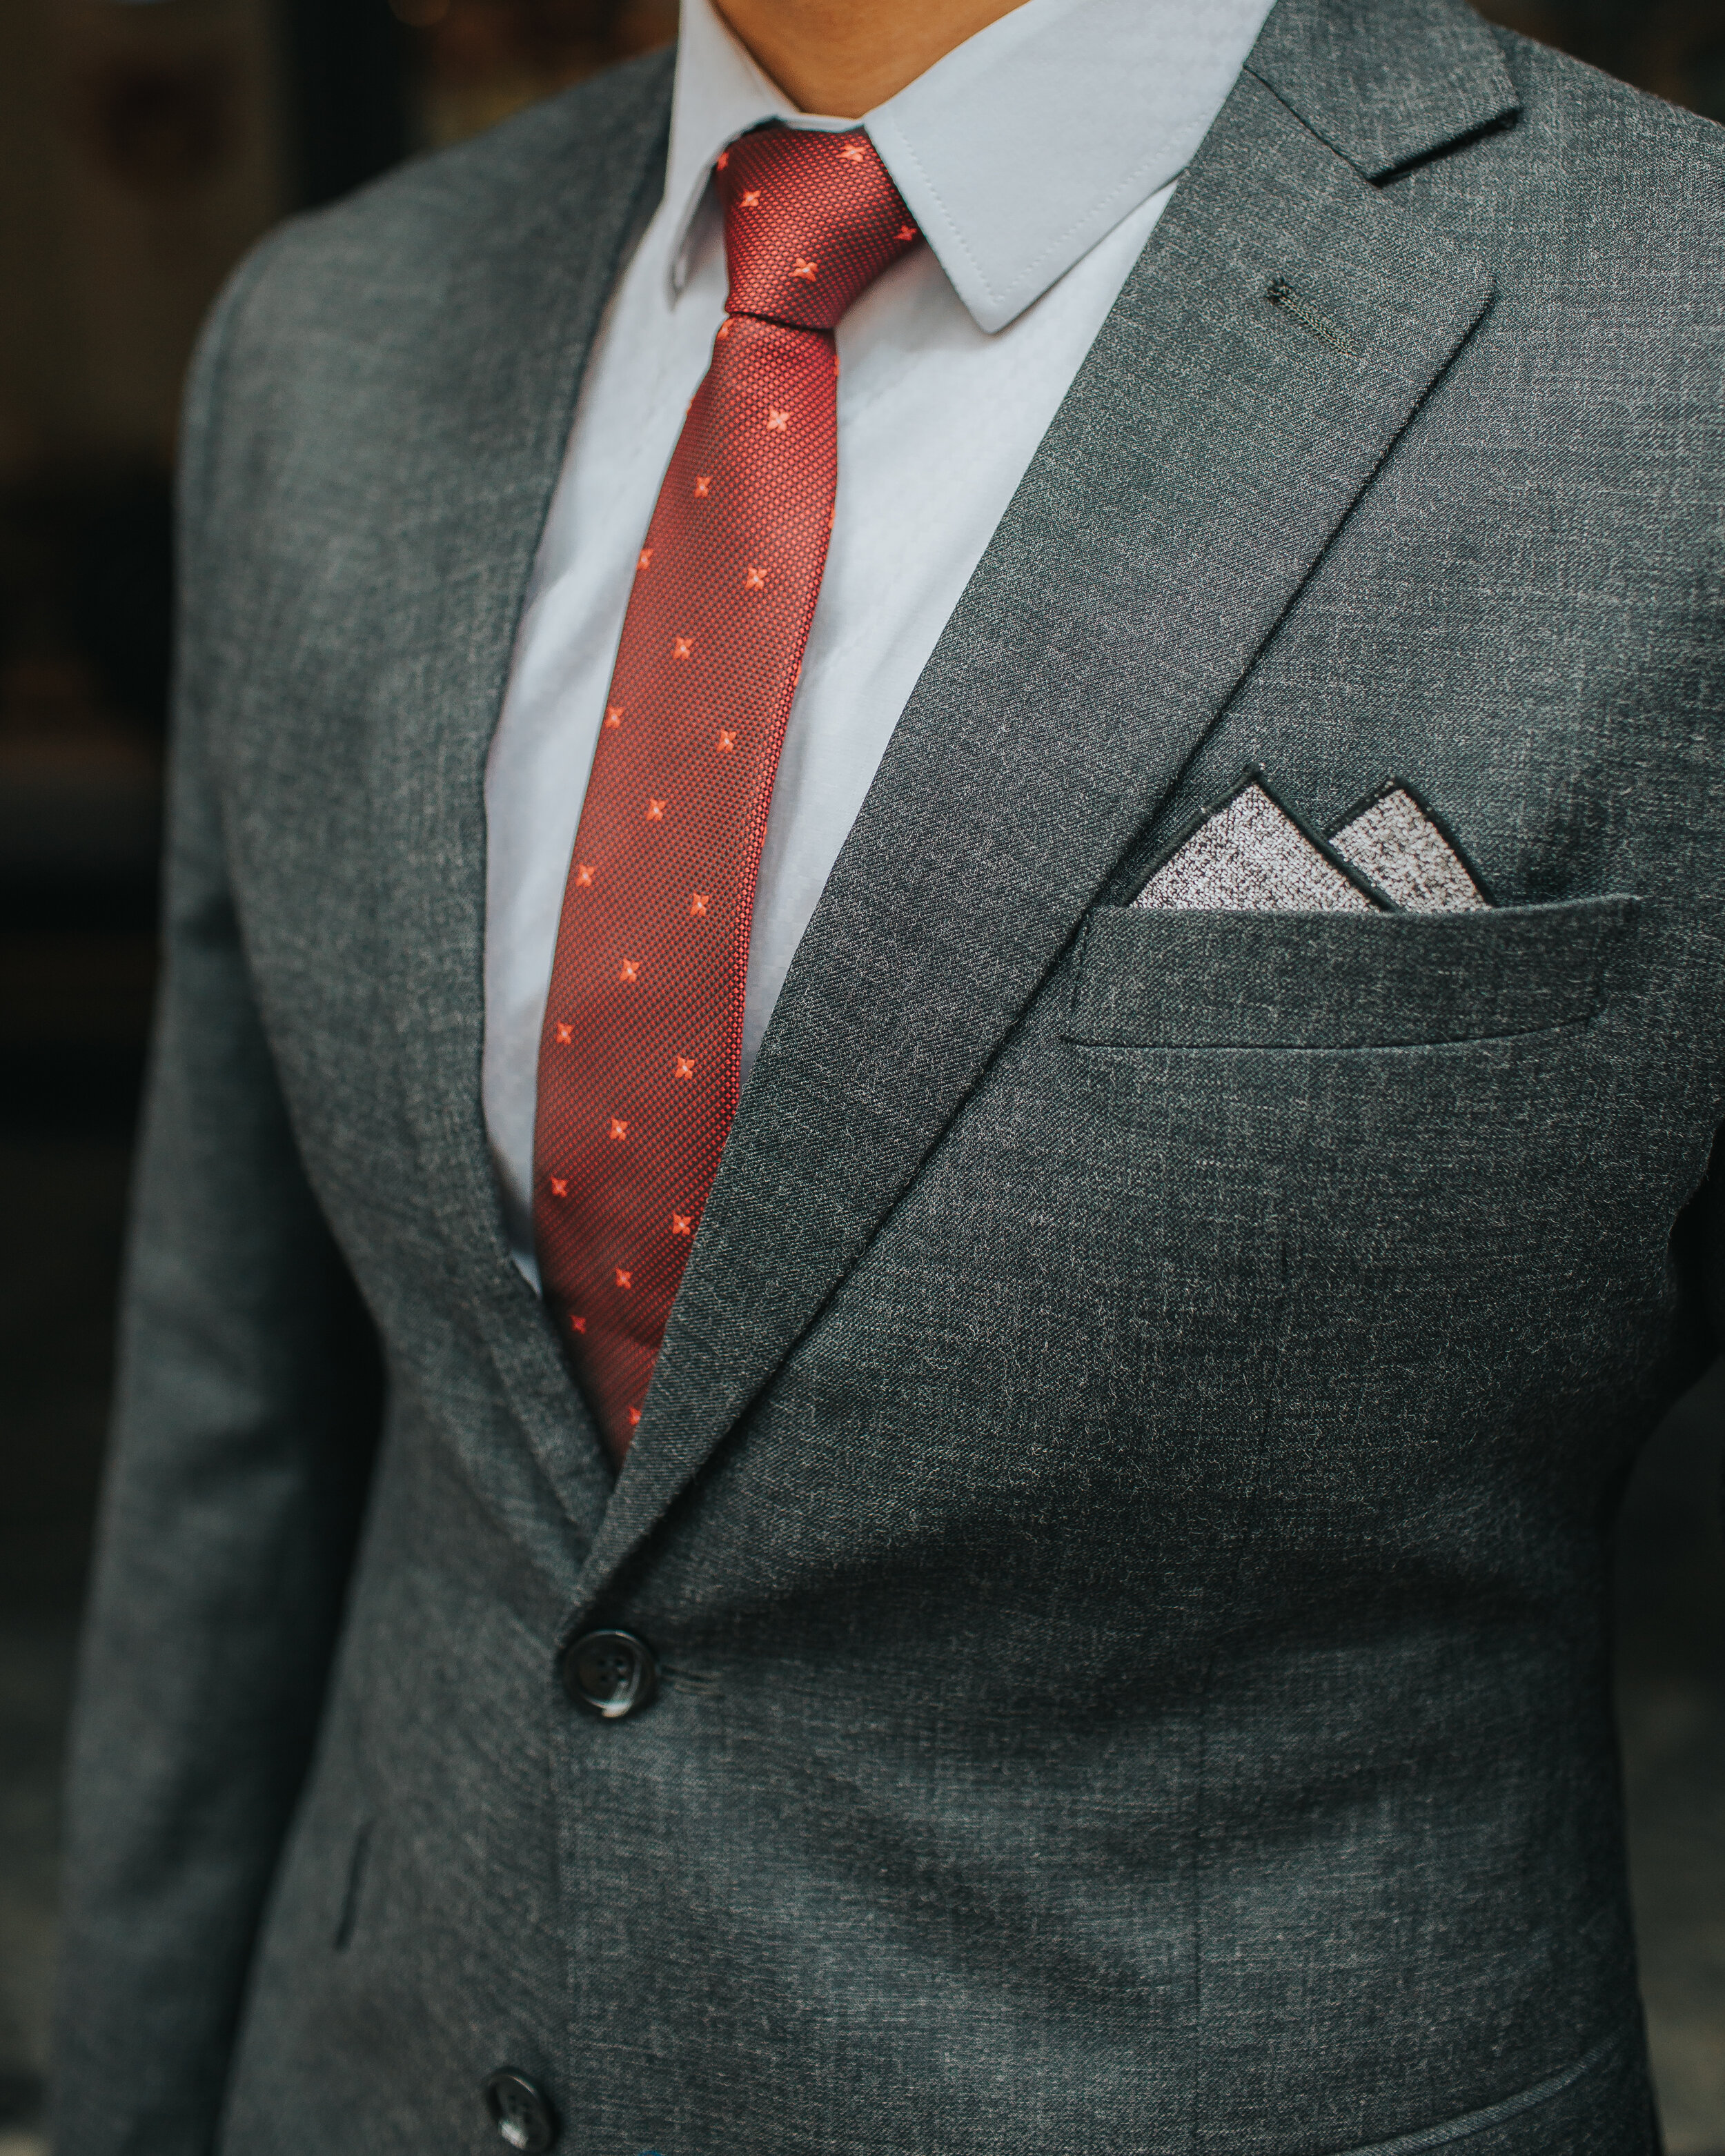 Pocket Square Rules And Etiquette In